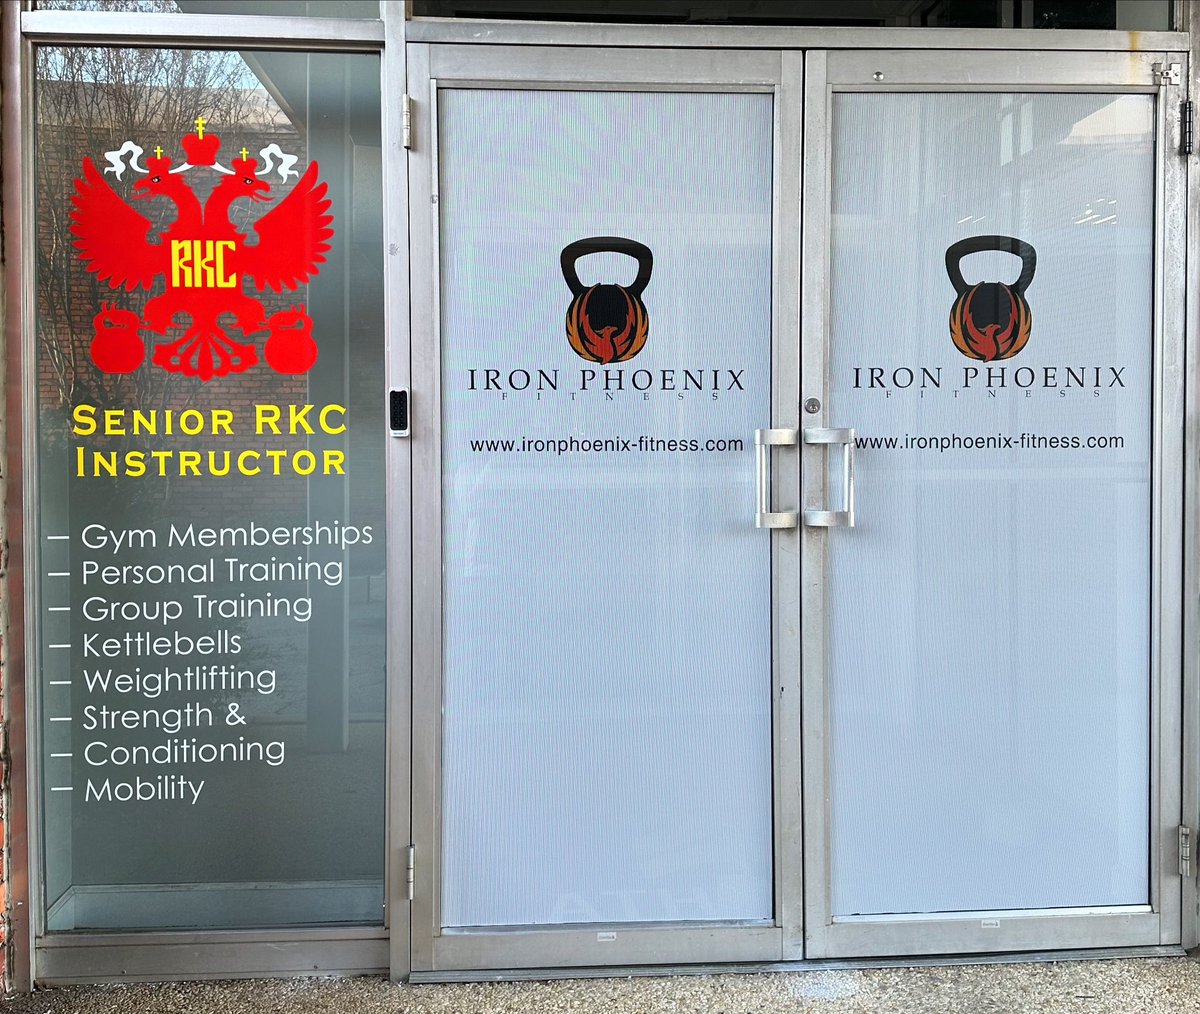 The front entrance just got an upgrade 💪💪 #iron_phoenix_fitness #gym #downtownromega #personaltraining #grouptraining #workout #train #lift #goals